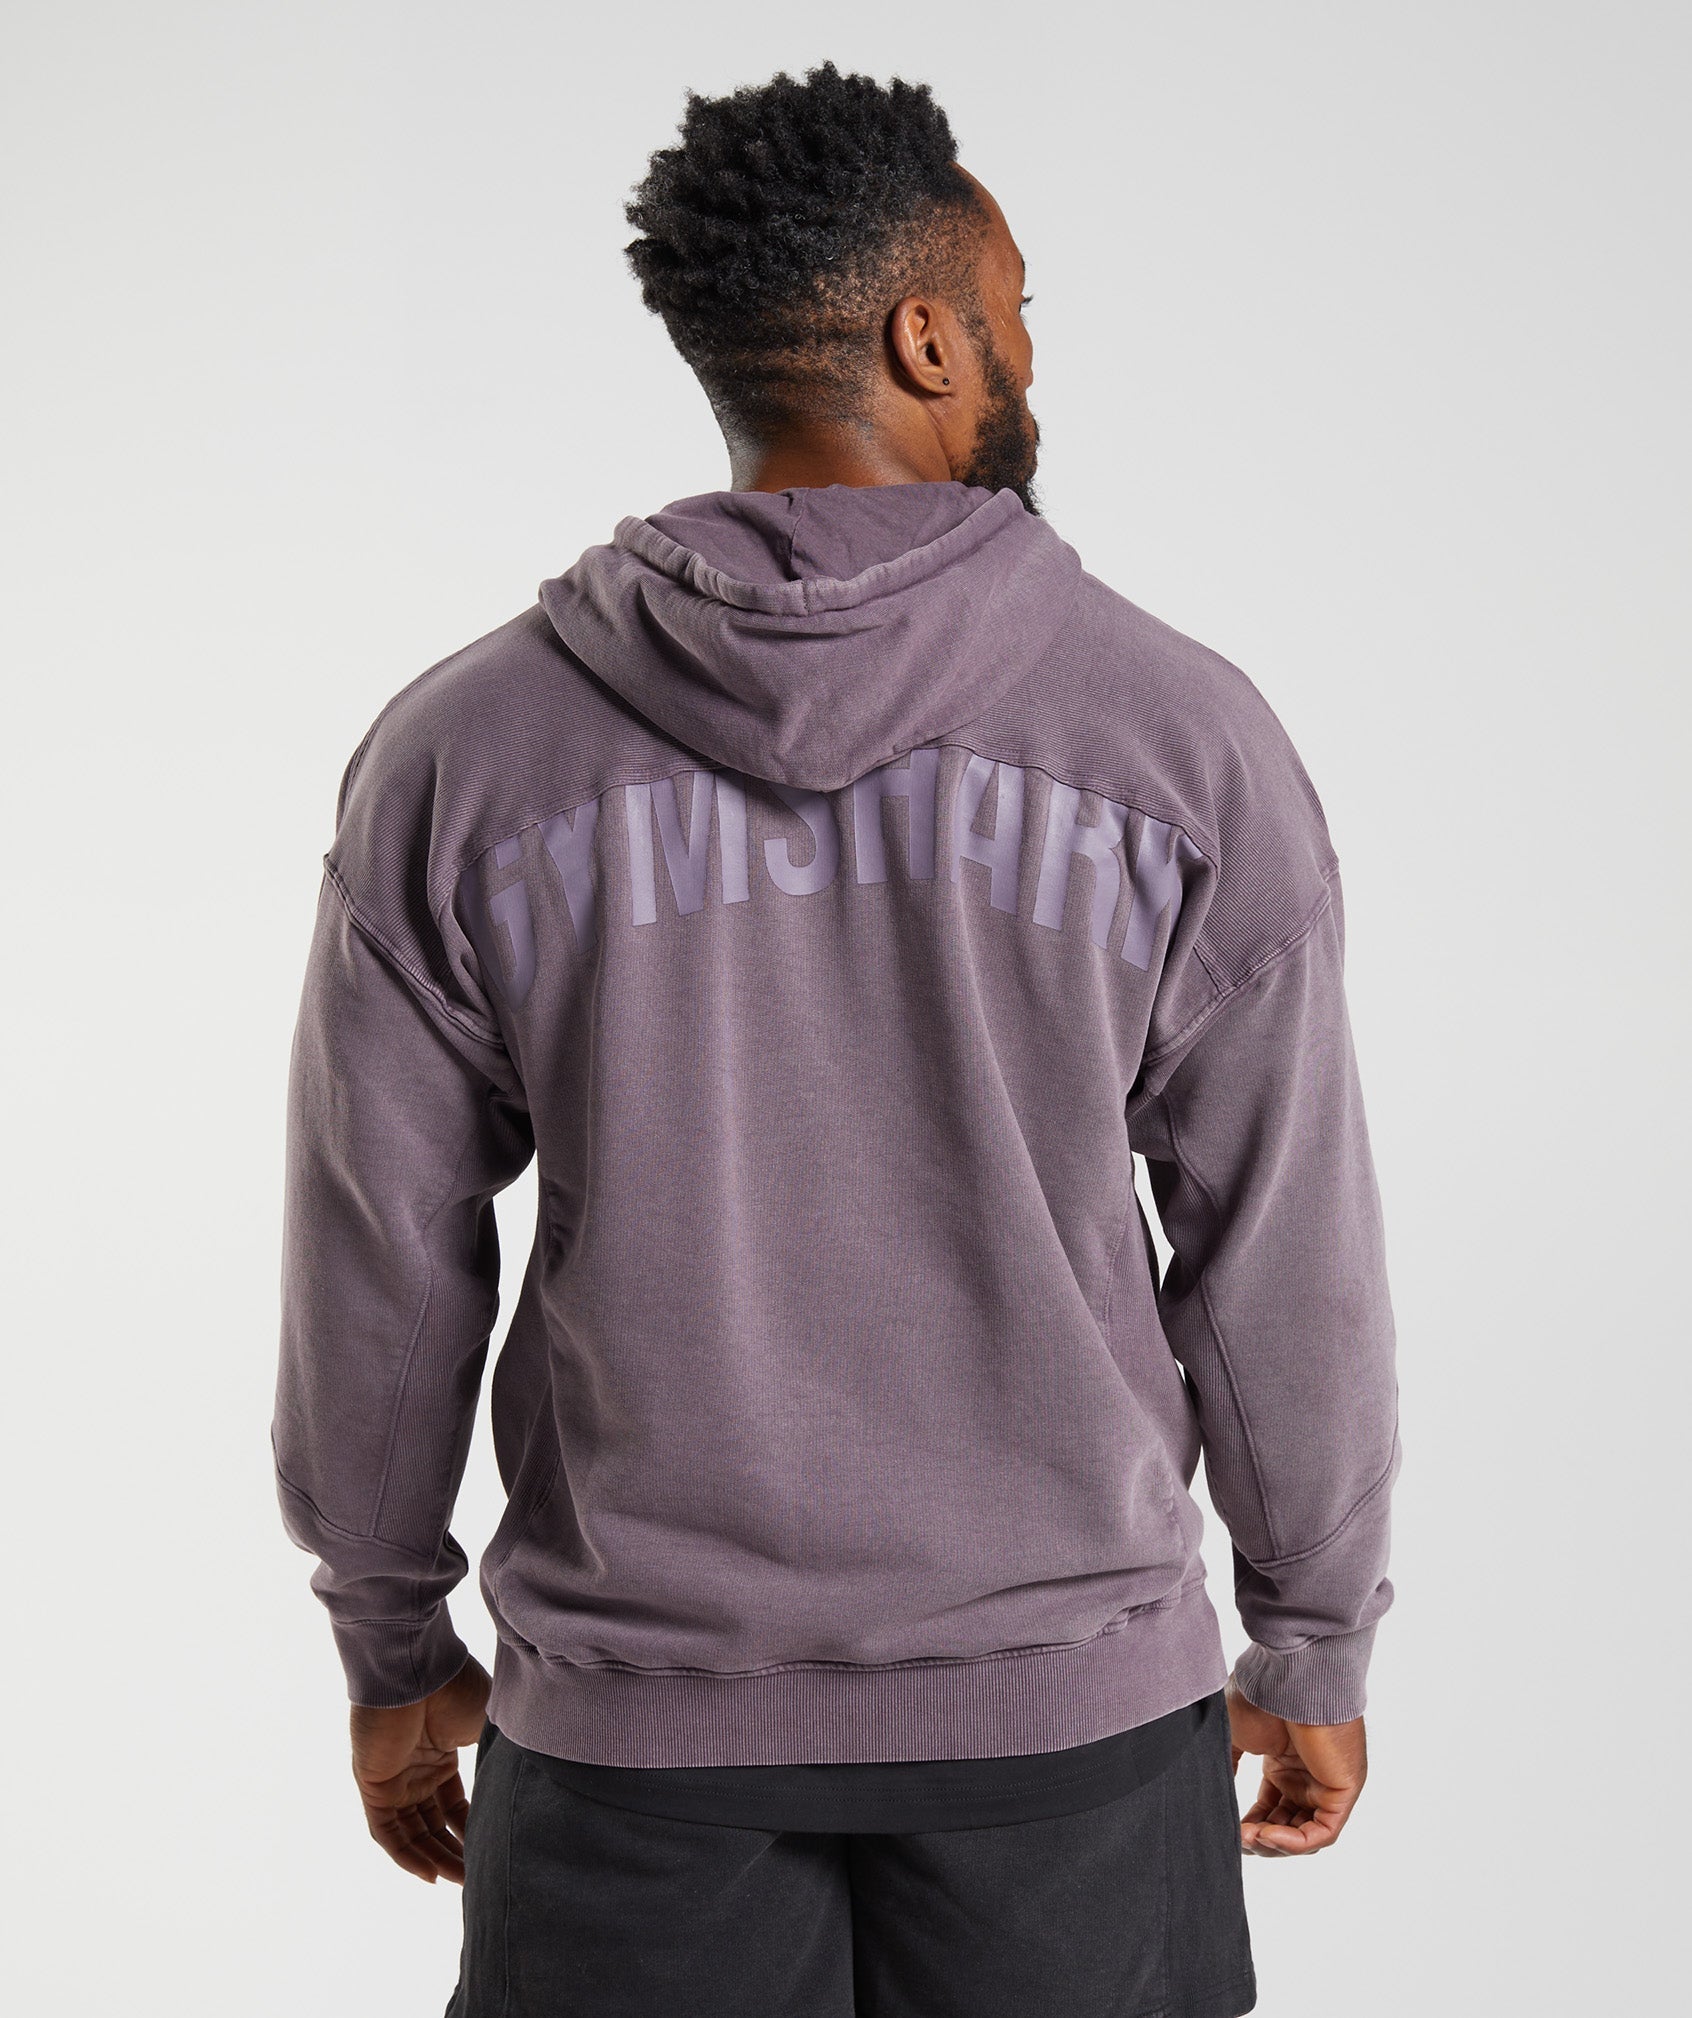 mens gymshark hoodie Size Small Gray With Graphic